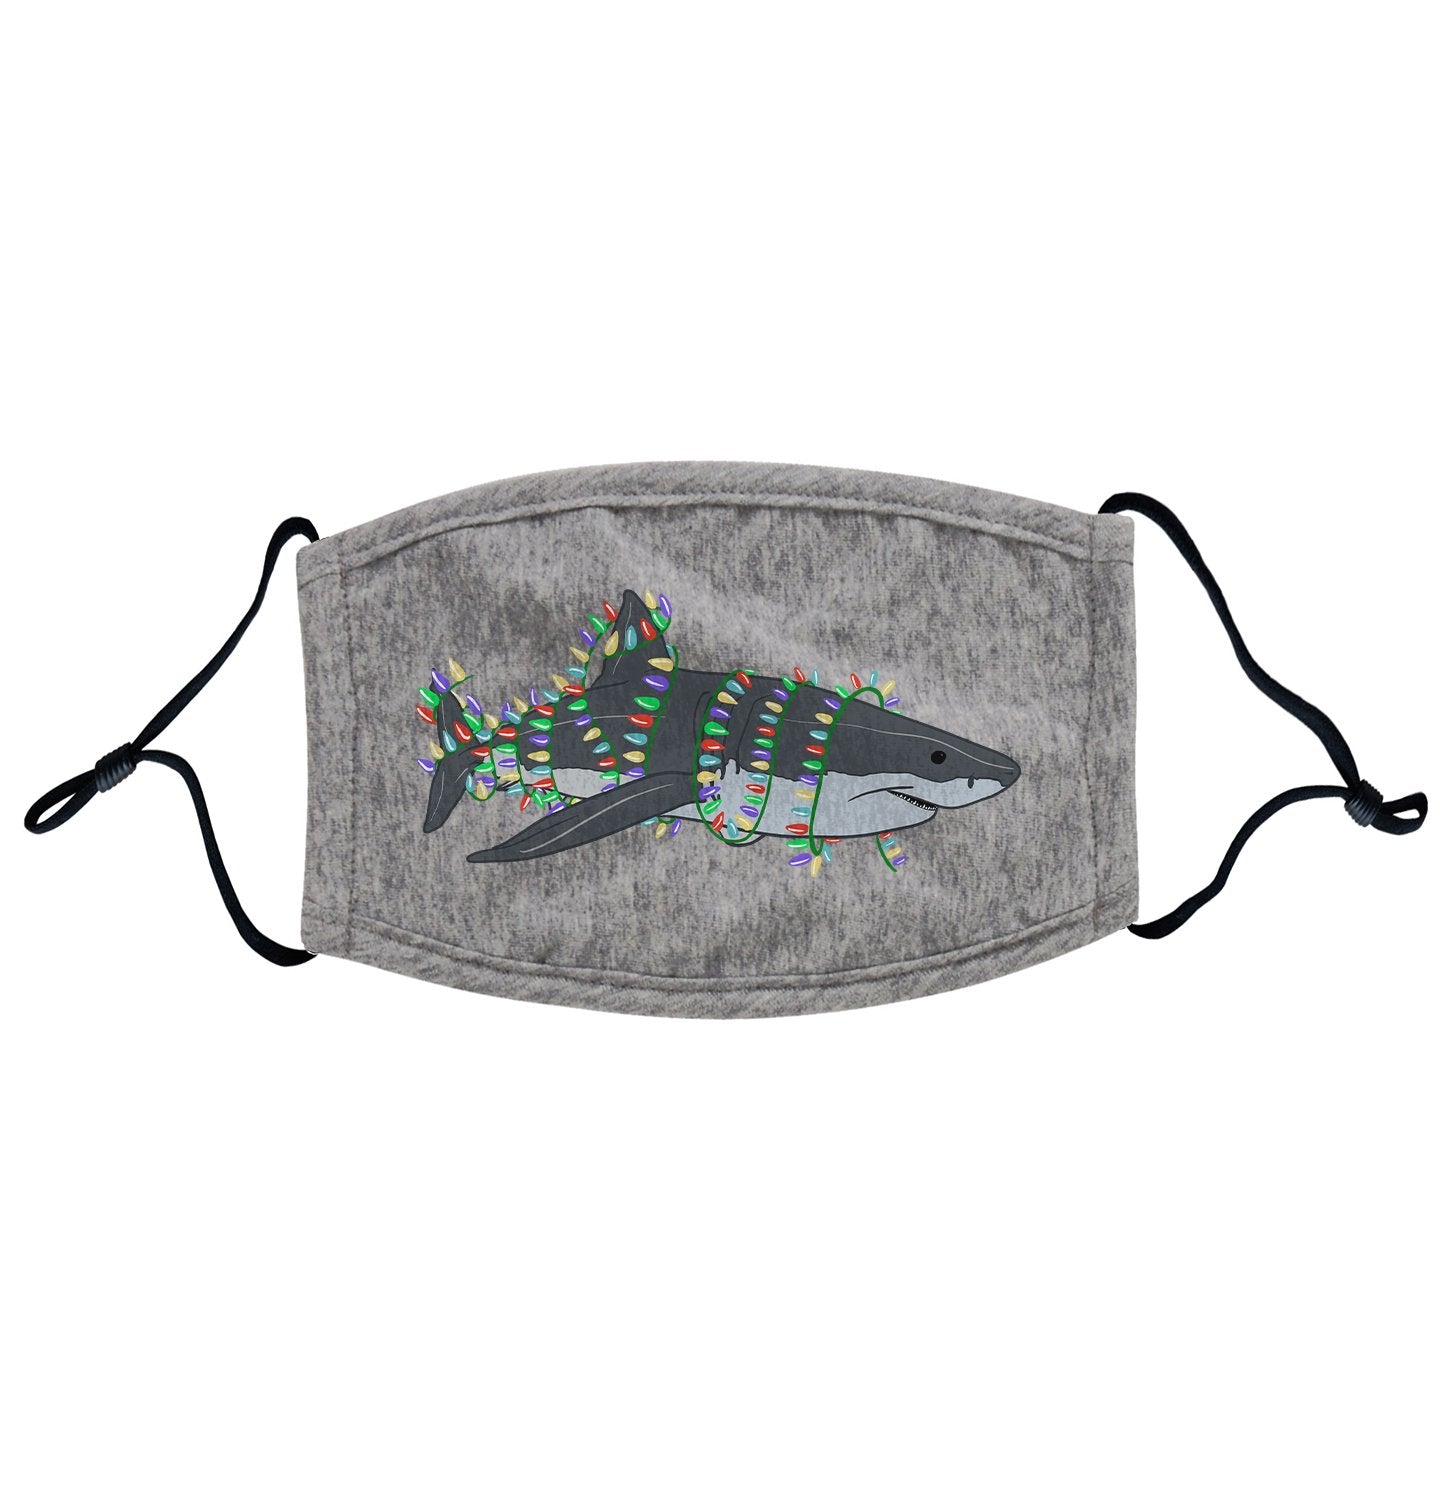 Deck the Jaws - Adult Adjustable Face Mask